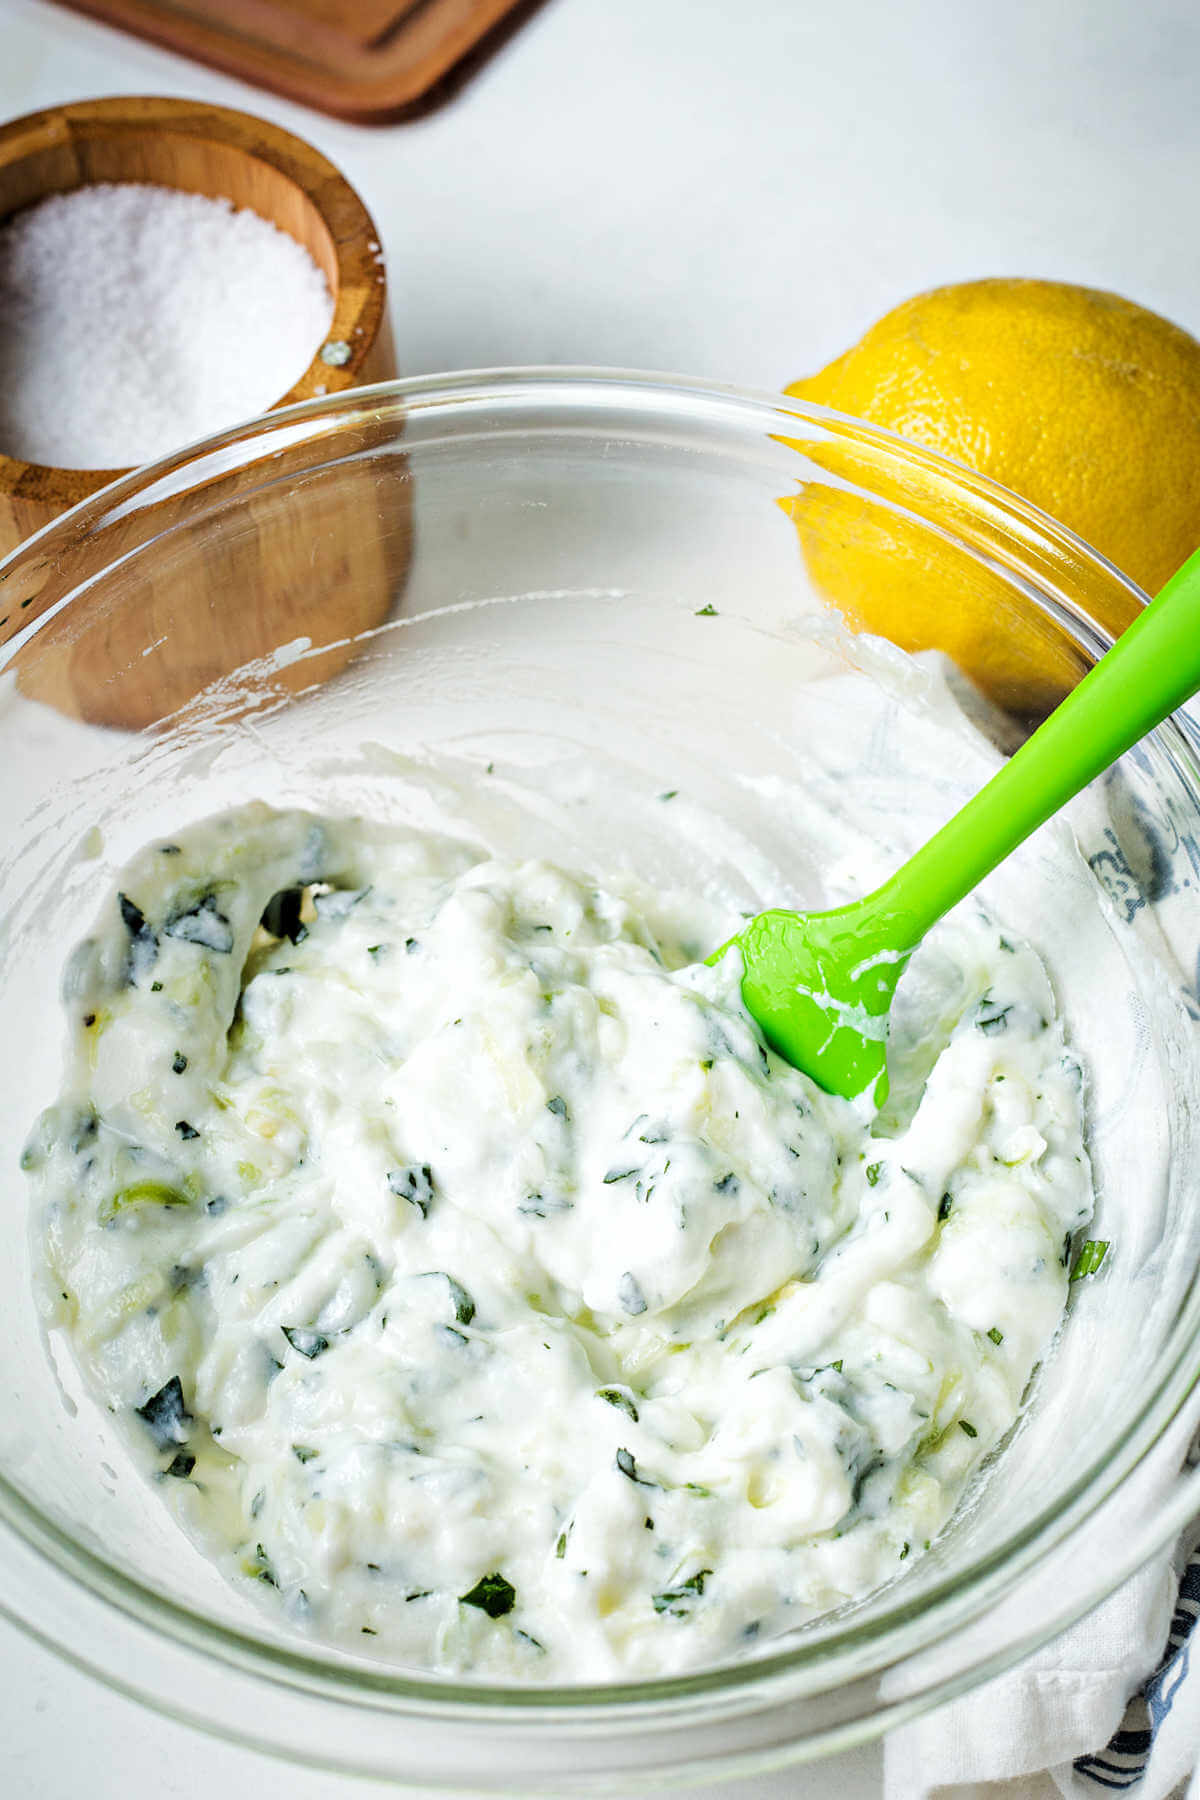 stirring together the ingredients for Tzatziki sauce in a glass bowl.